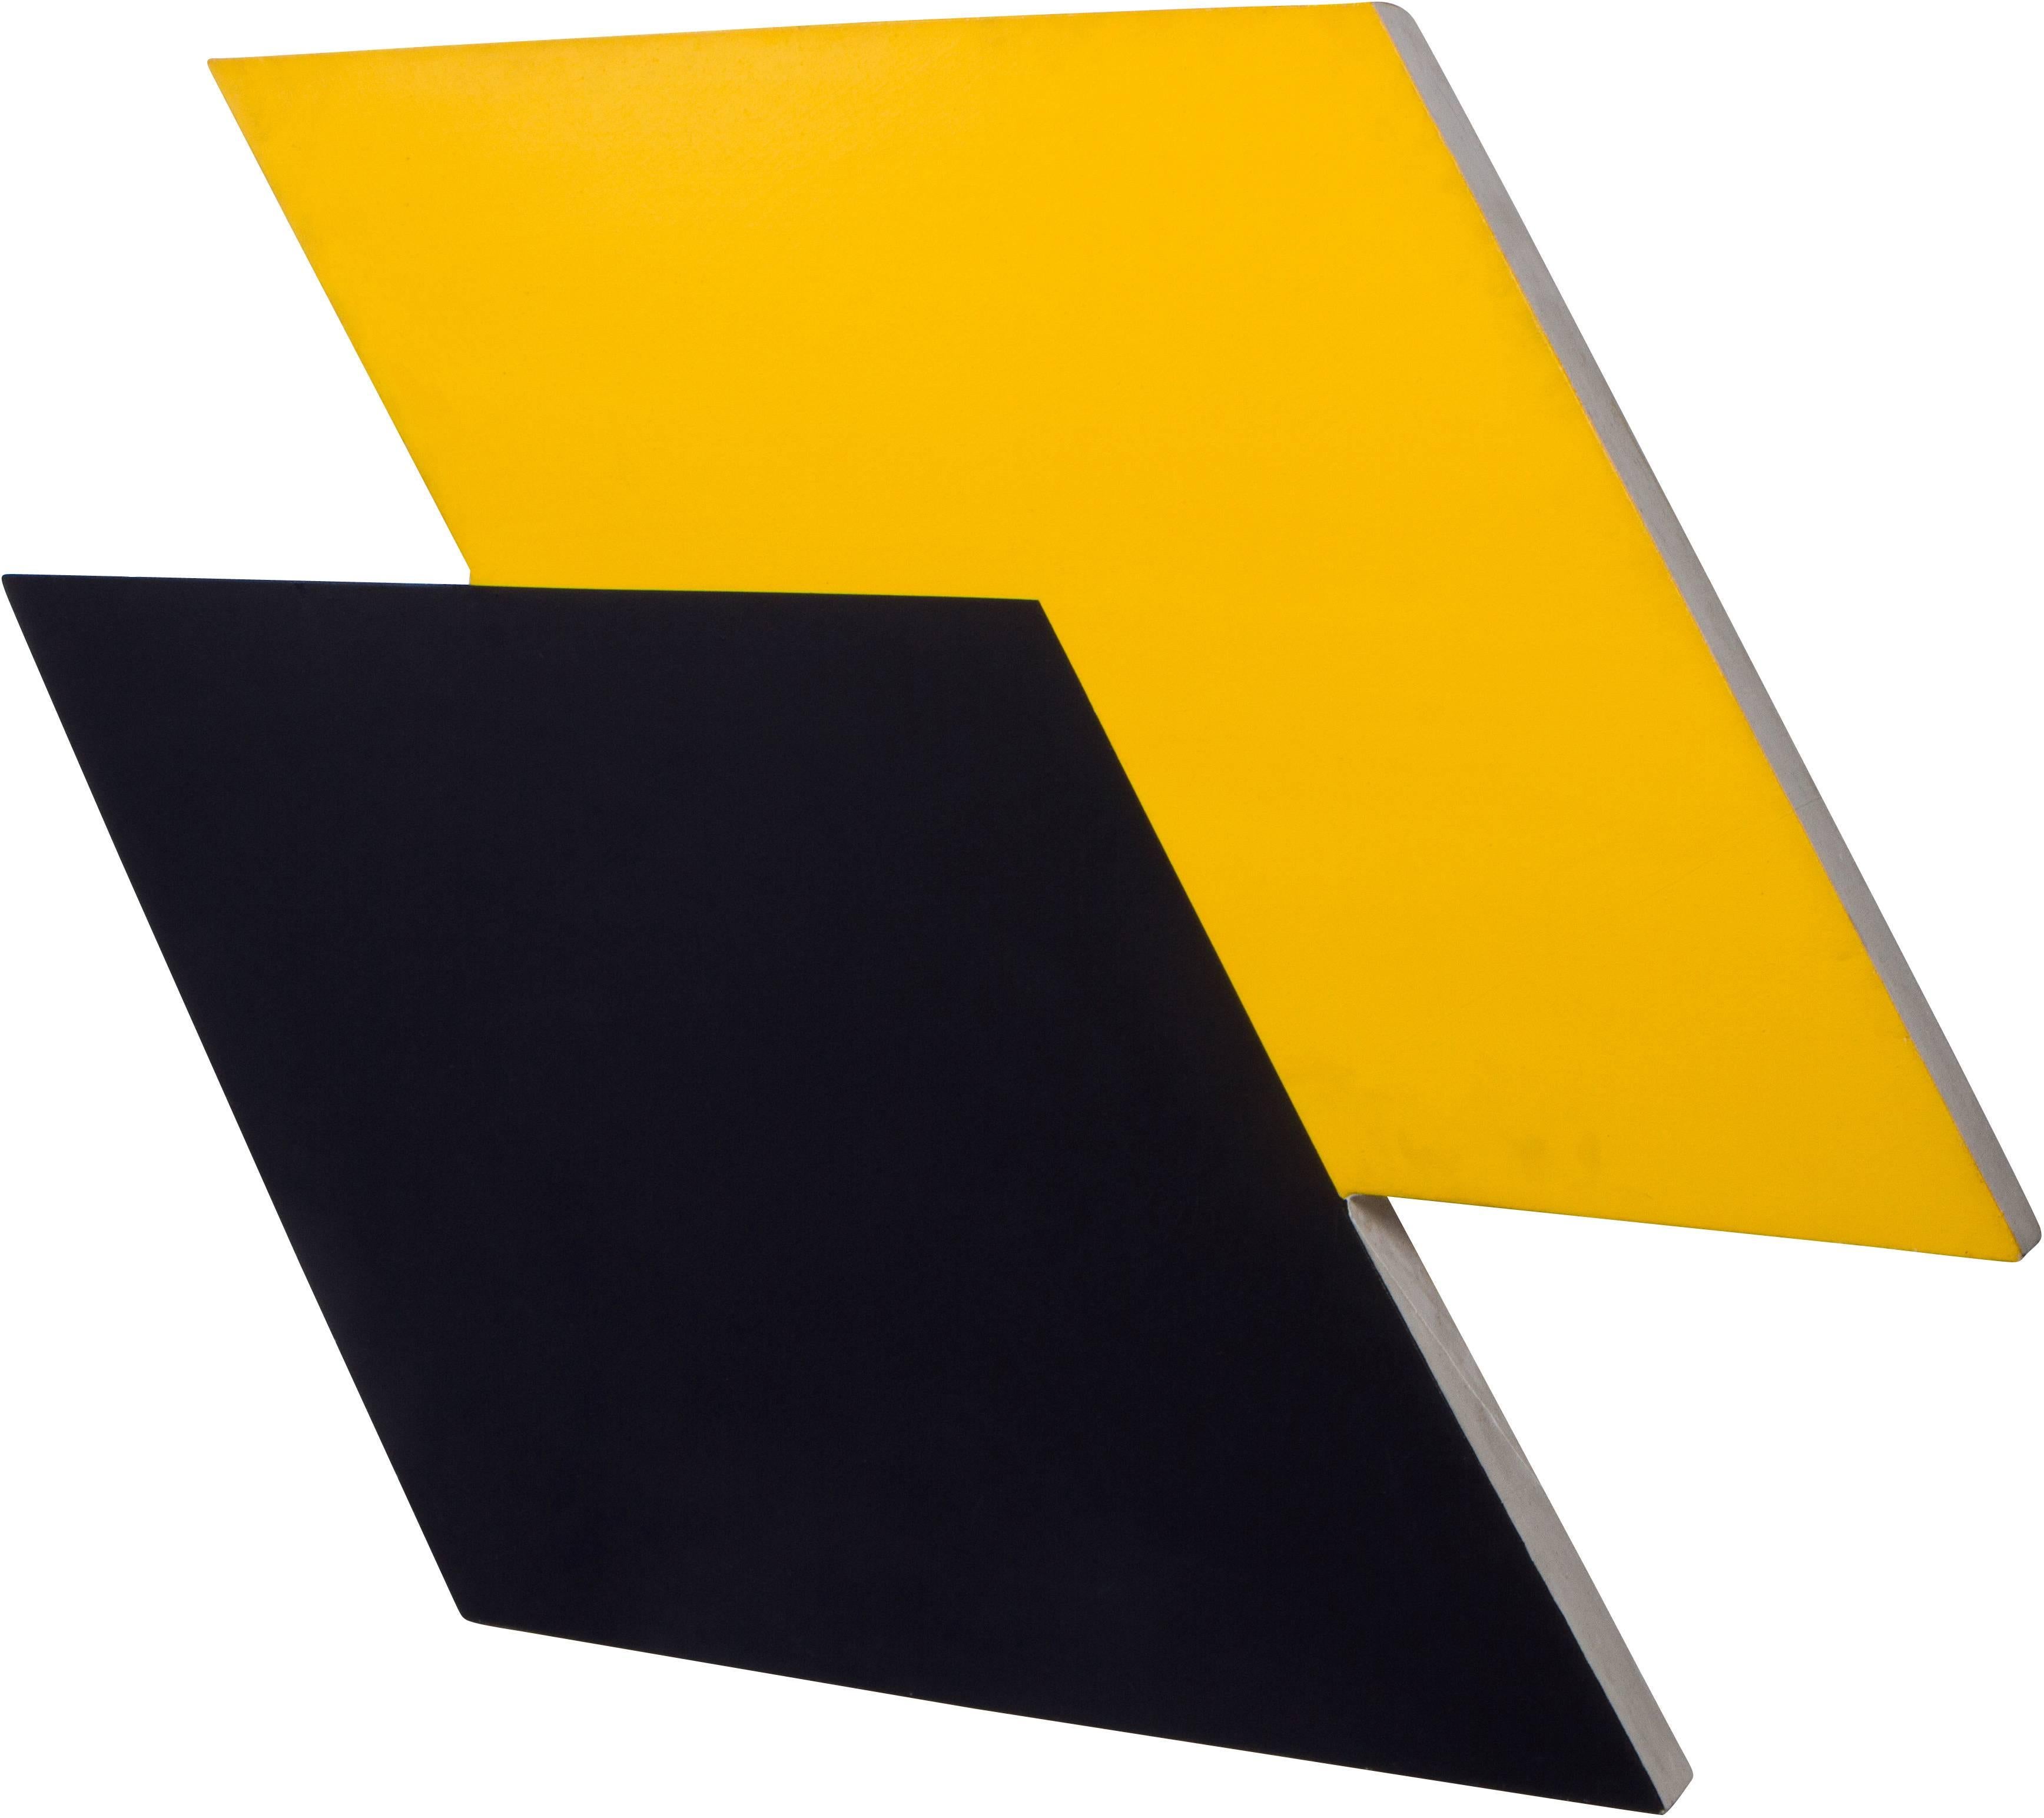 Dramatic and decorative 1980s hard edge abstract painting in yellow and black by Clarissa Mitchell. Acrylic on canvas. Unsigned but gallery tag remains in verso.